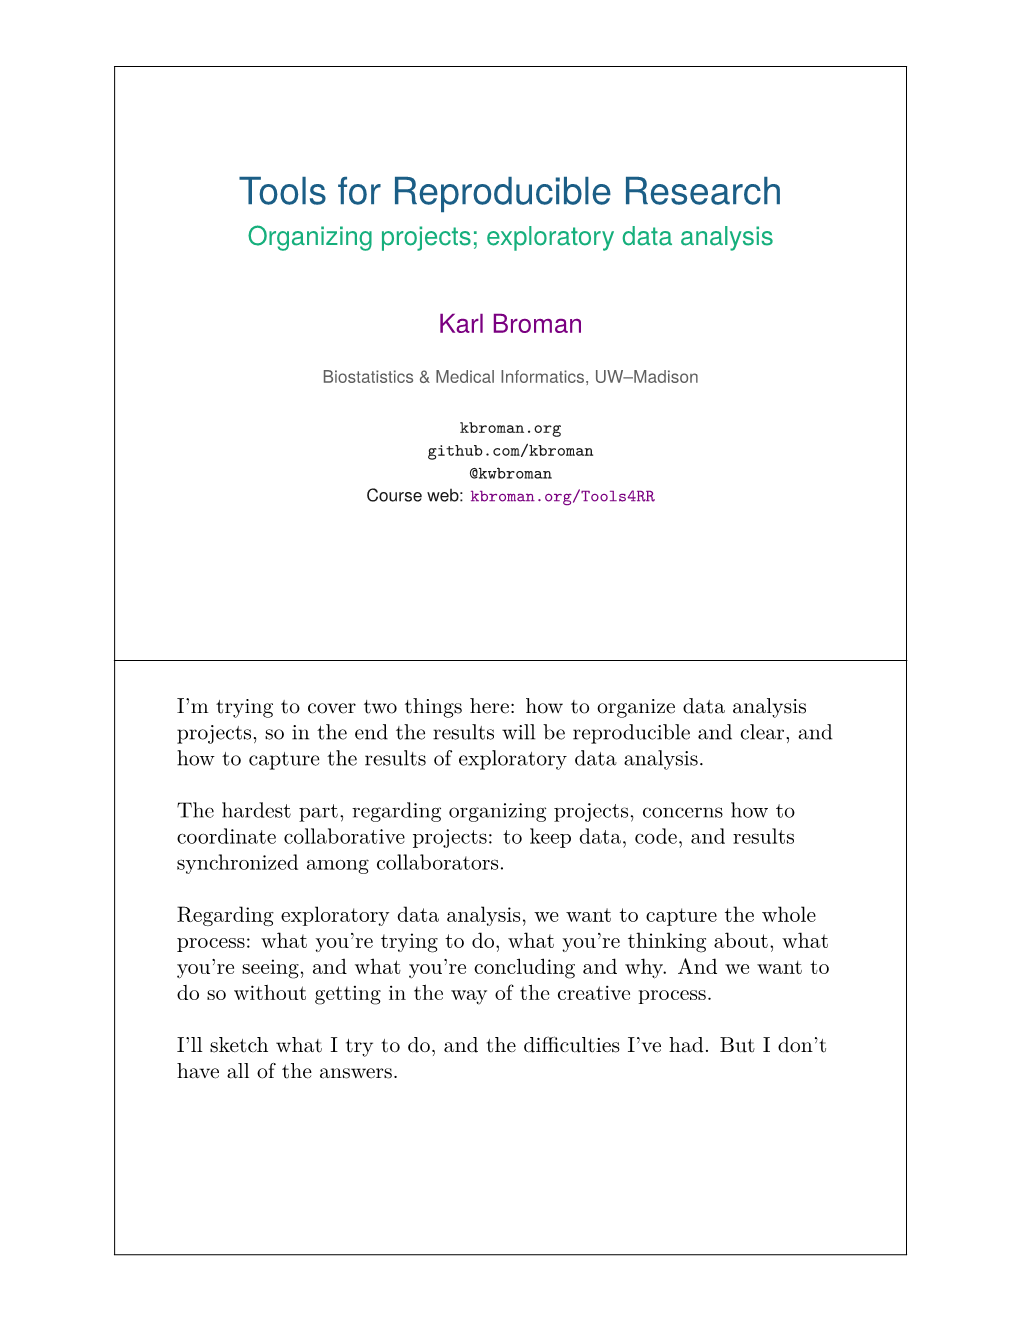 Tools for Reproducible Research Organizing Projects; Exploratory Data Analysis